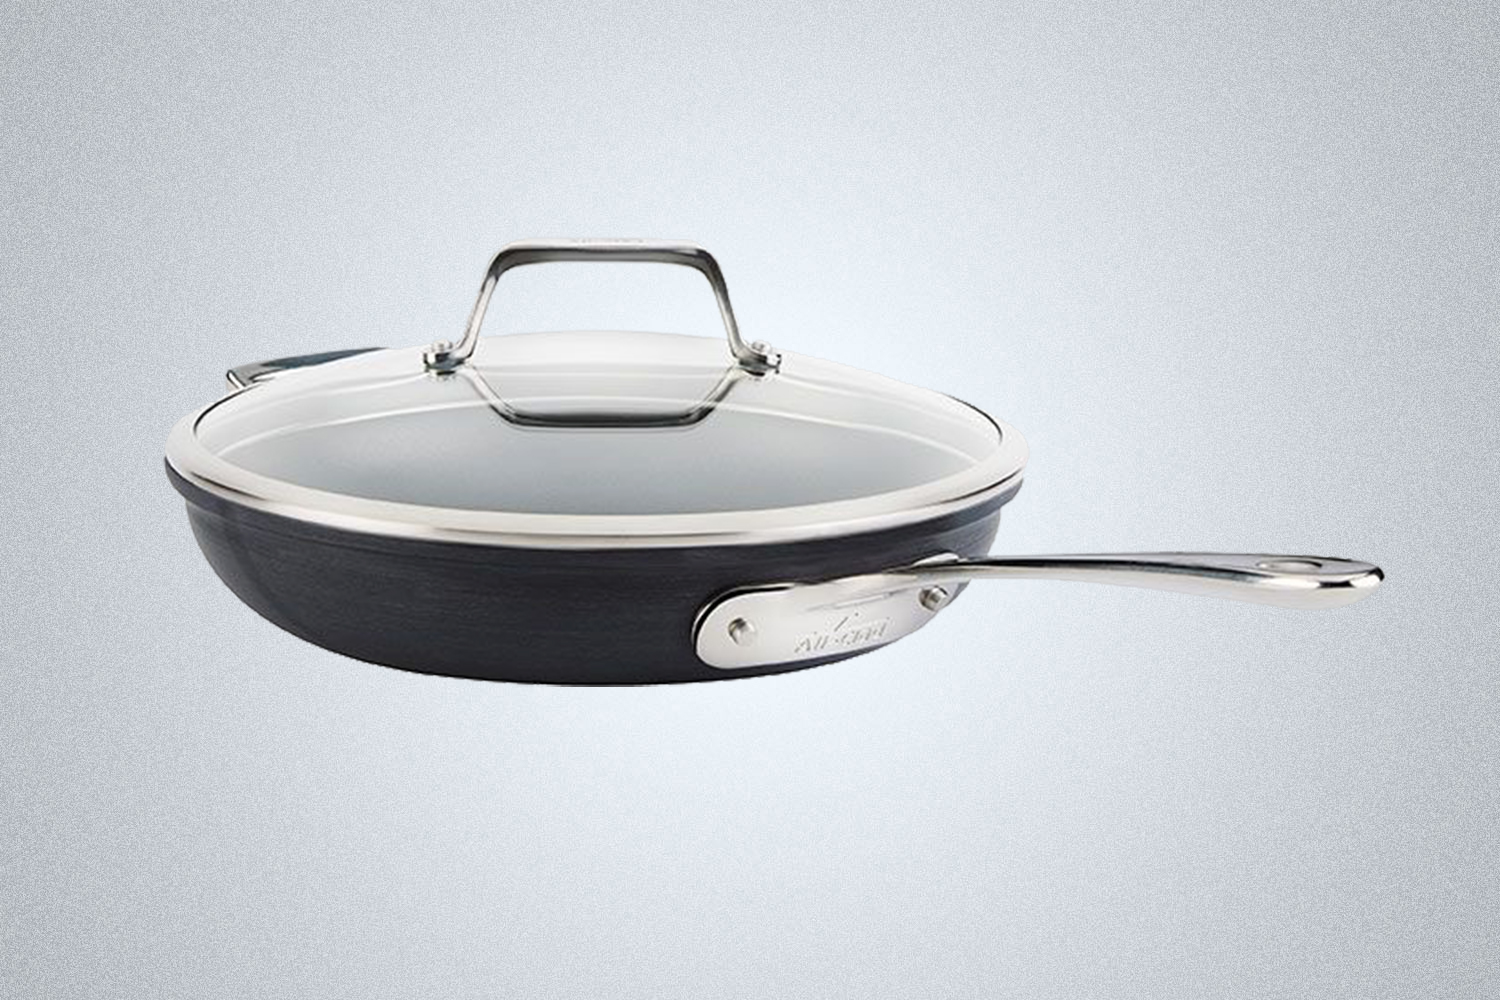 All-Clad Sale 2023: Coveted Pots and Pans For Up to 70% Off